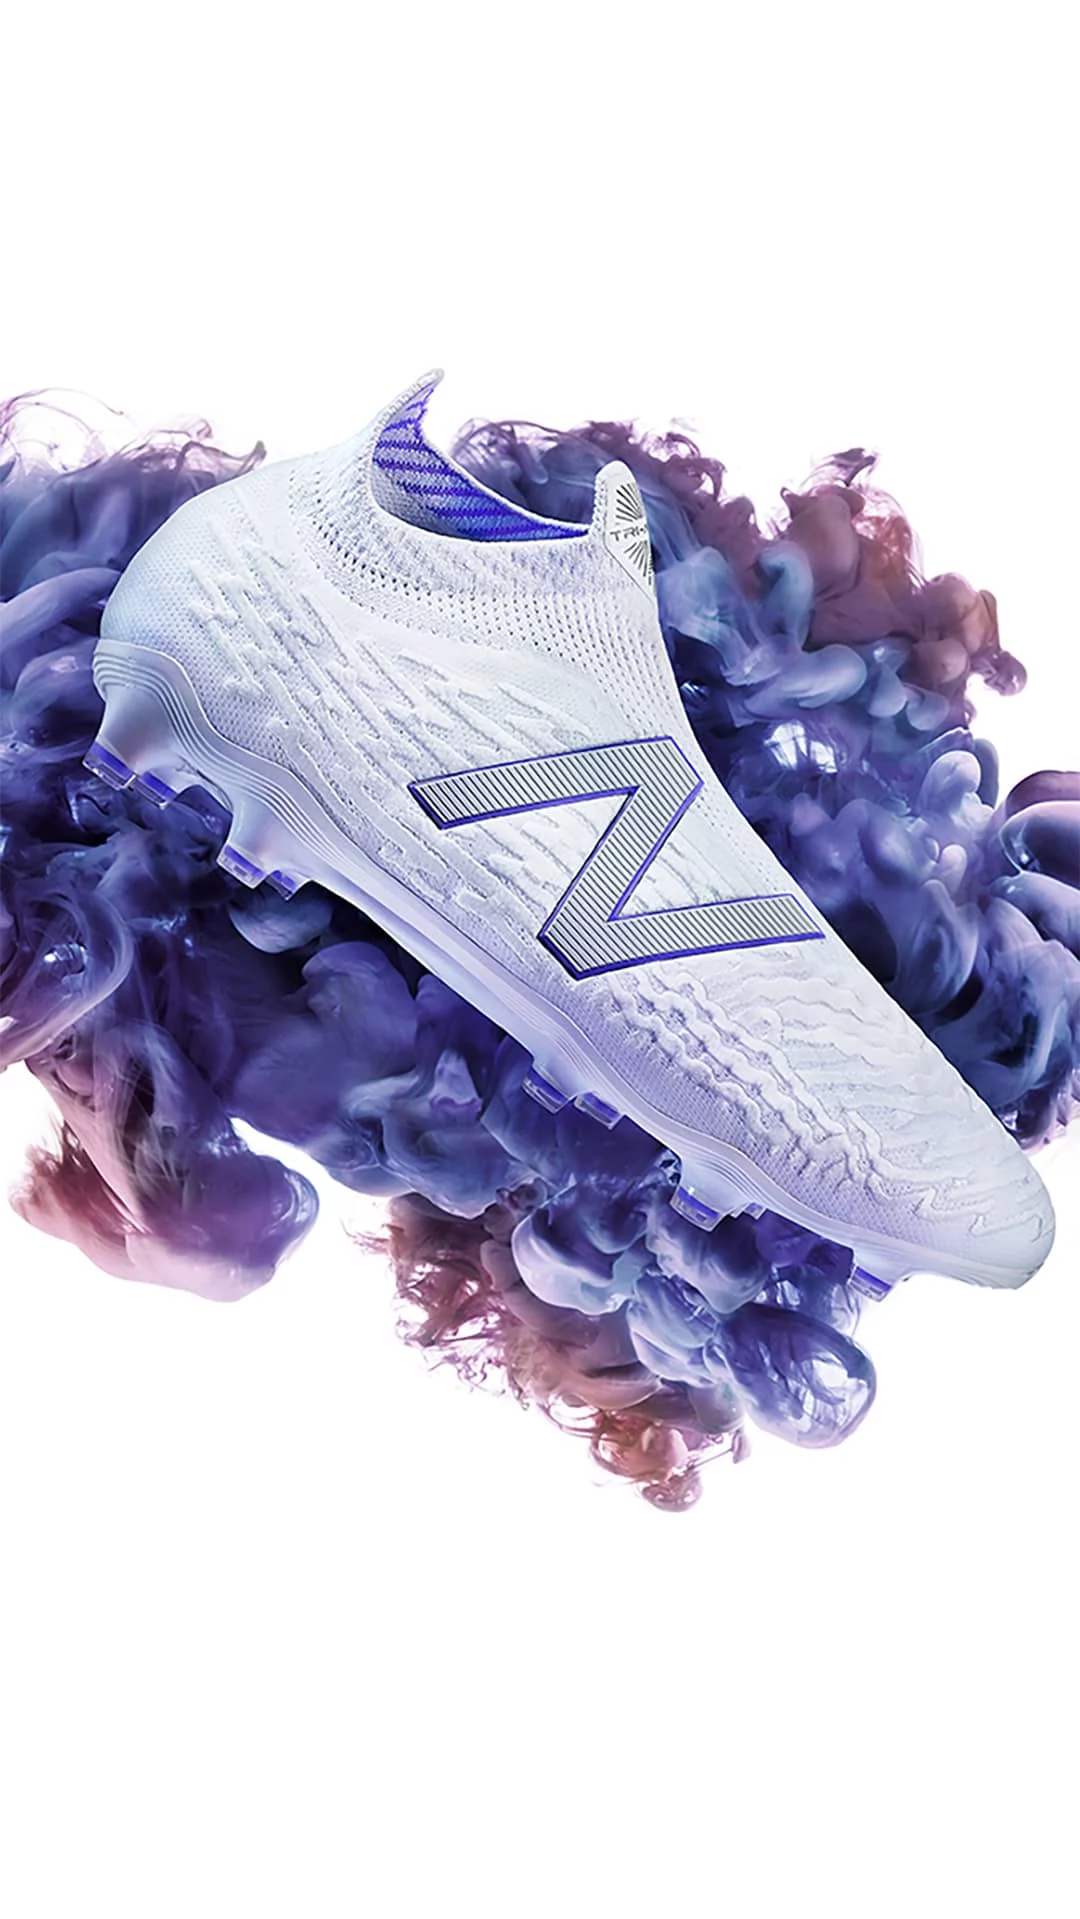 new balance all white football boots pack 2